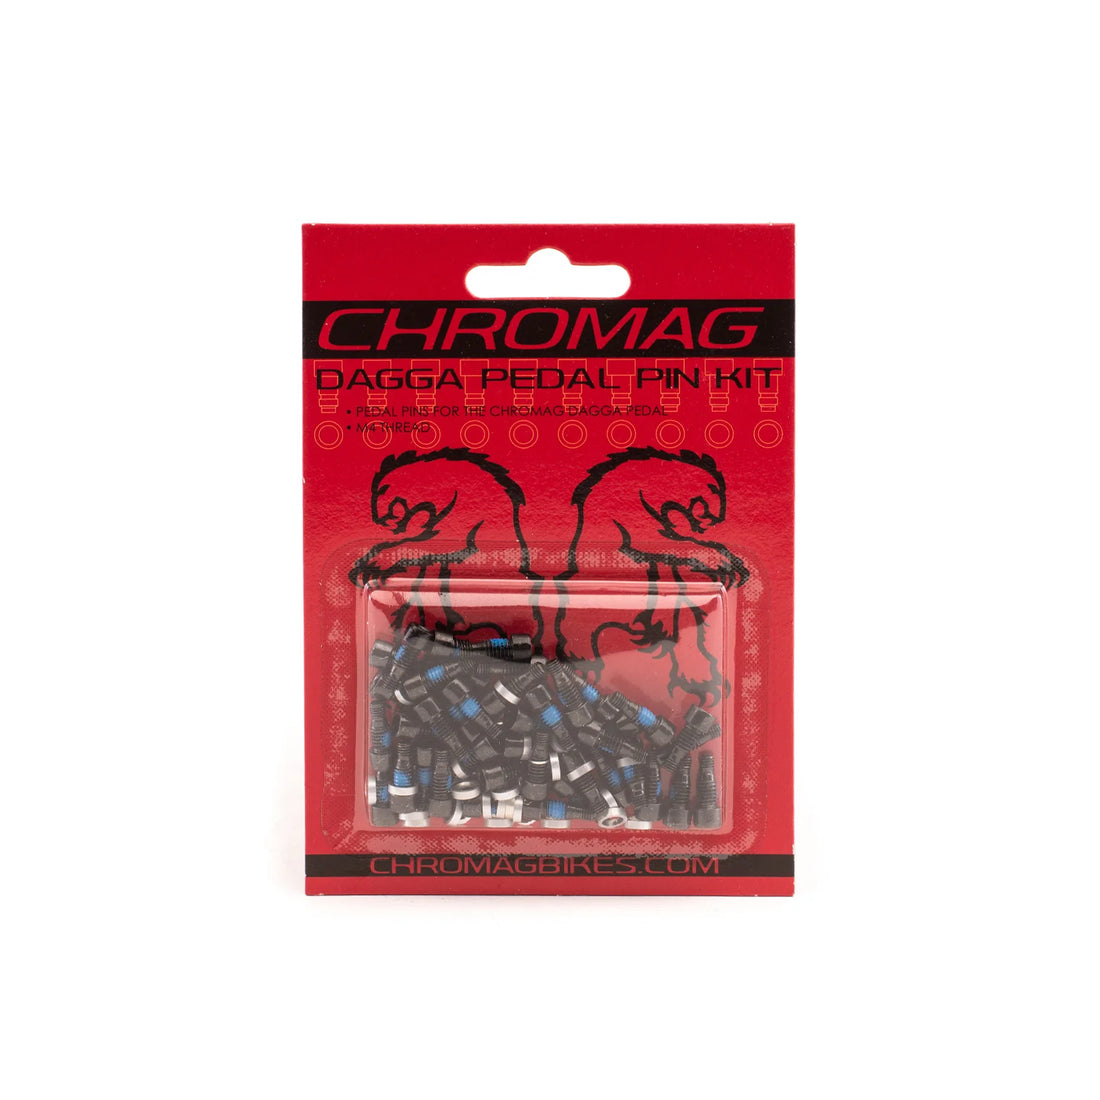 Chromag Replacement Pedal Pin Kit